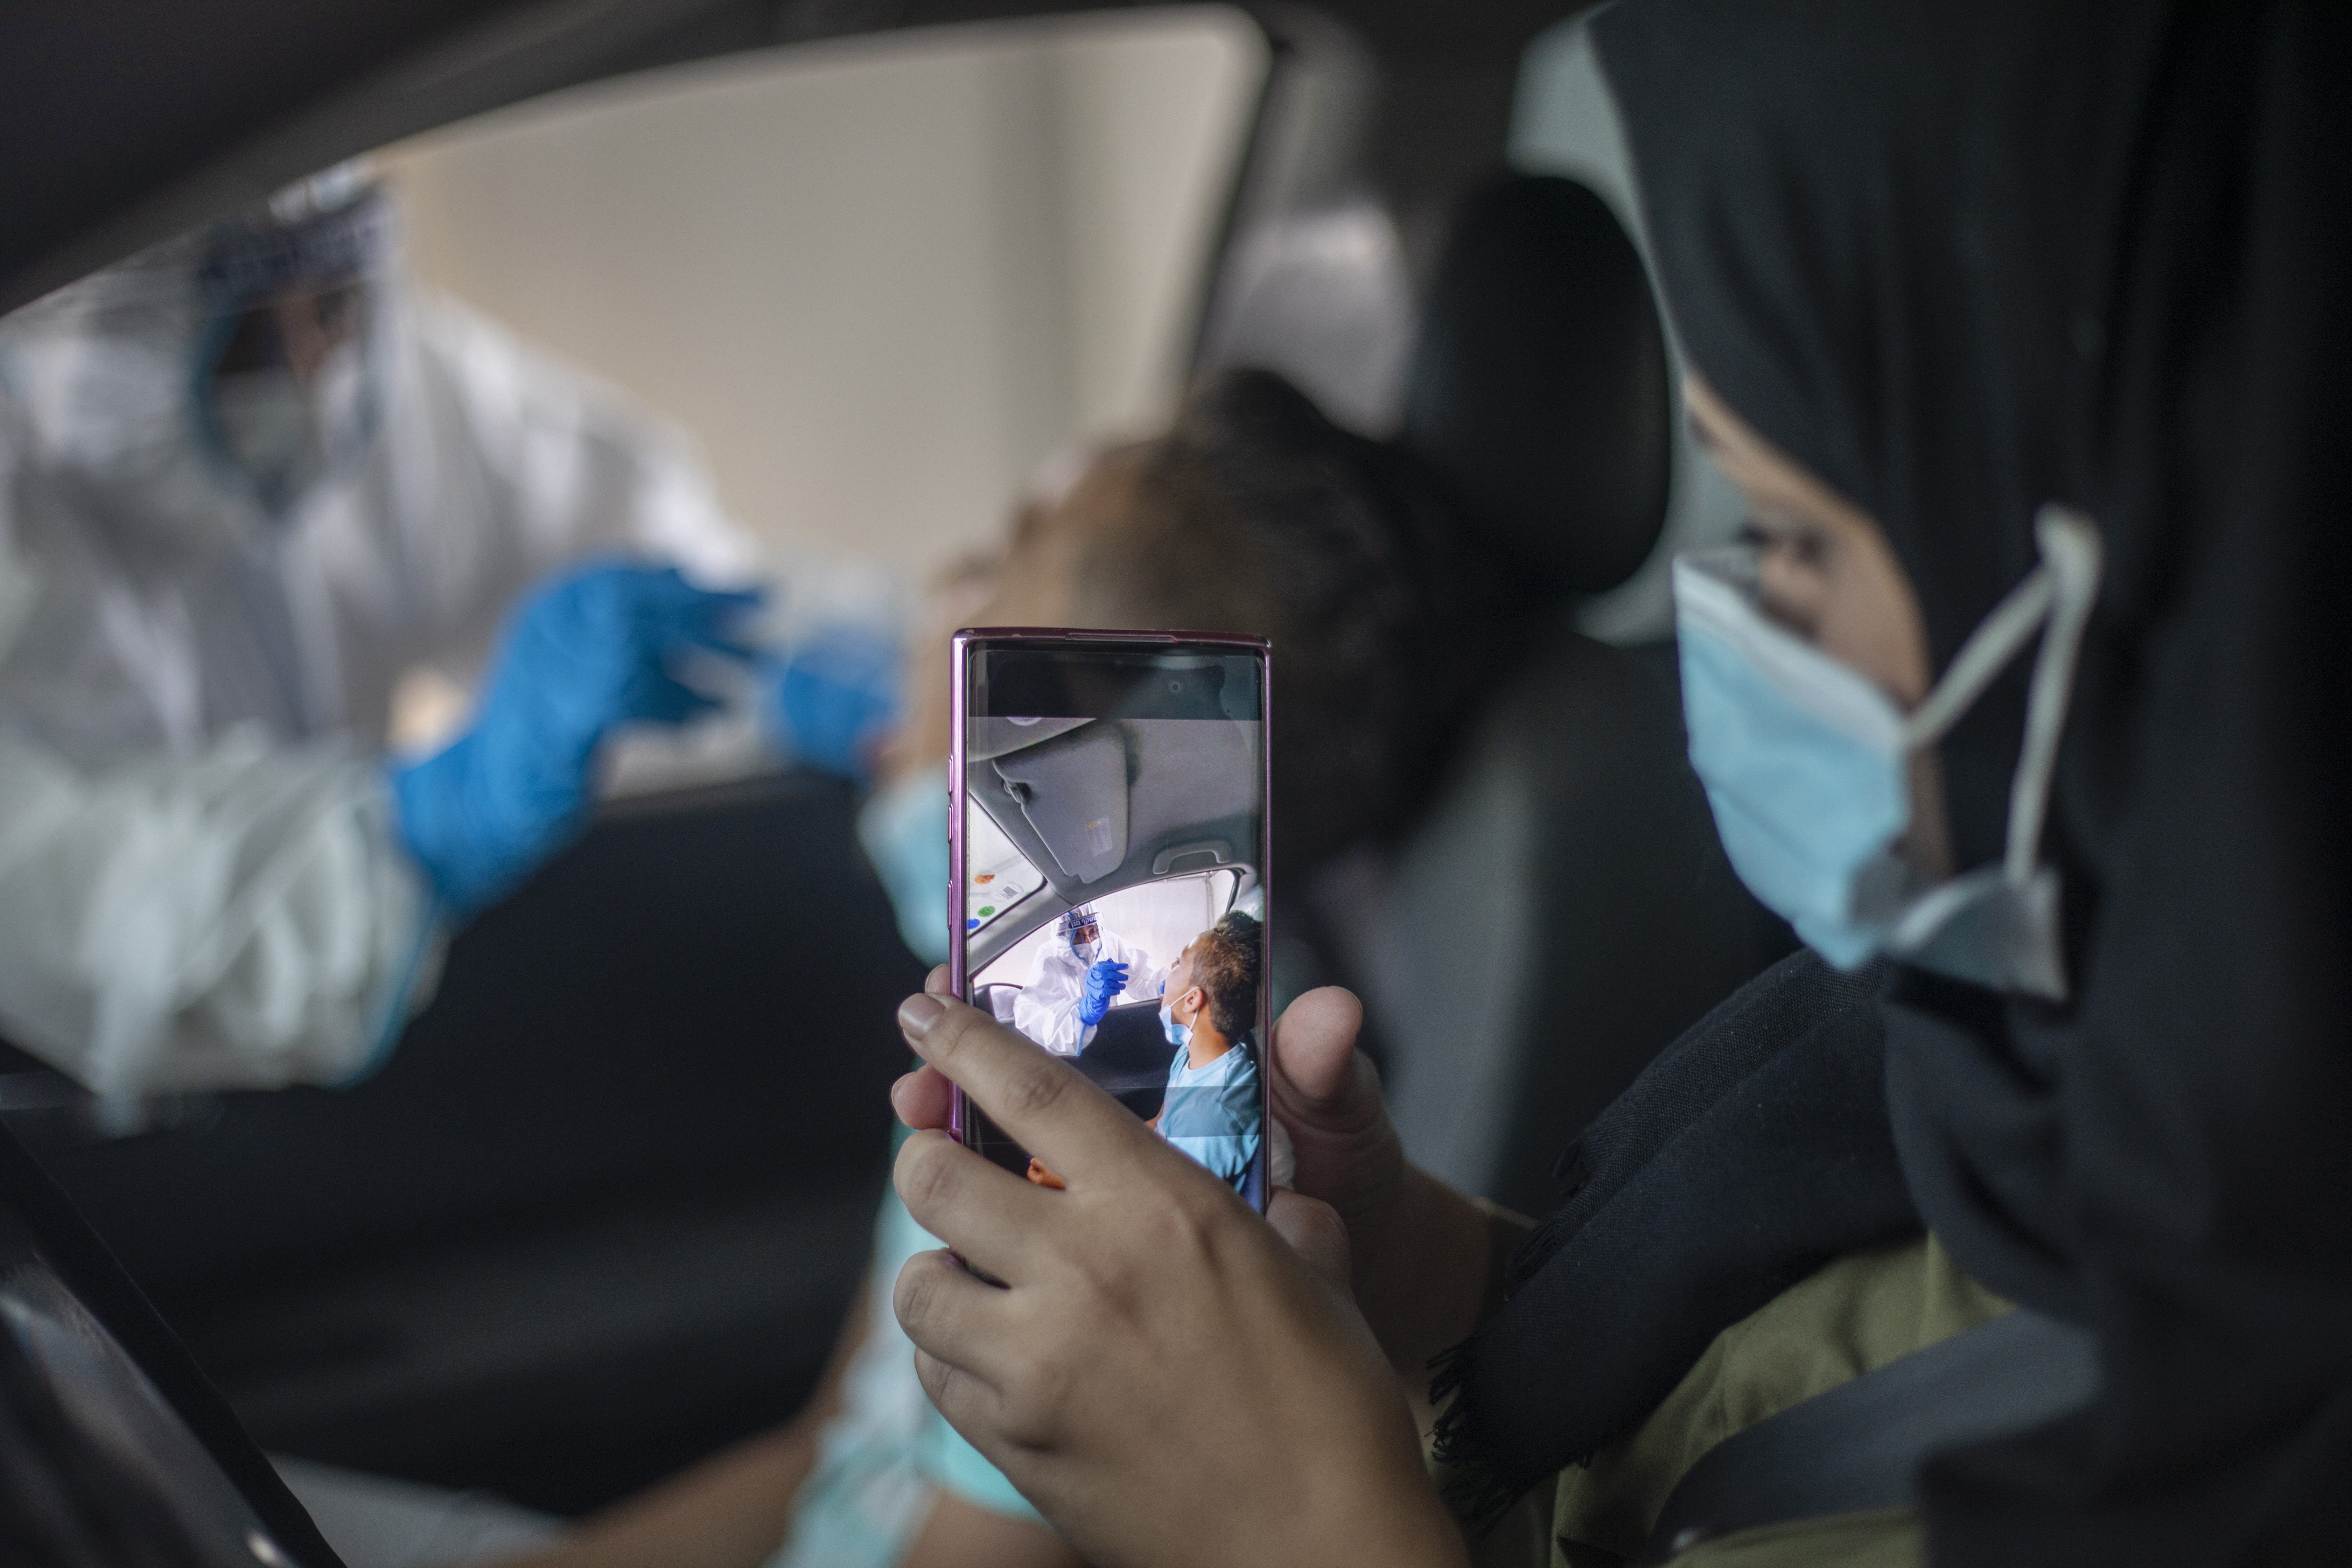 A mother uses a smart phone to capture how her son is tested for Covid-19 by a healthcare worker at a drive-thru COVID-19 testing centre set up at a parking area in east Jerusalem neighborhood of Sheikh Jarrah, Thursday, Sept. 10, 2020. Israel this week imposed new restrictions on some 40 cities and towns with worrying outbreaks, which include nighttime curfews, strict limits on public gatherings and the shuttering of schools. (AP Photo/Ariel Schalit)